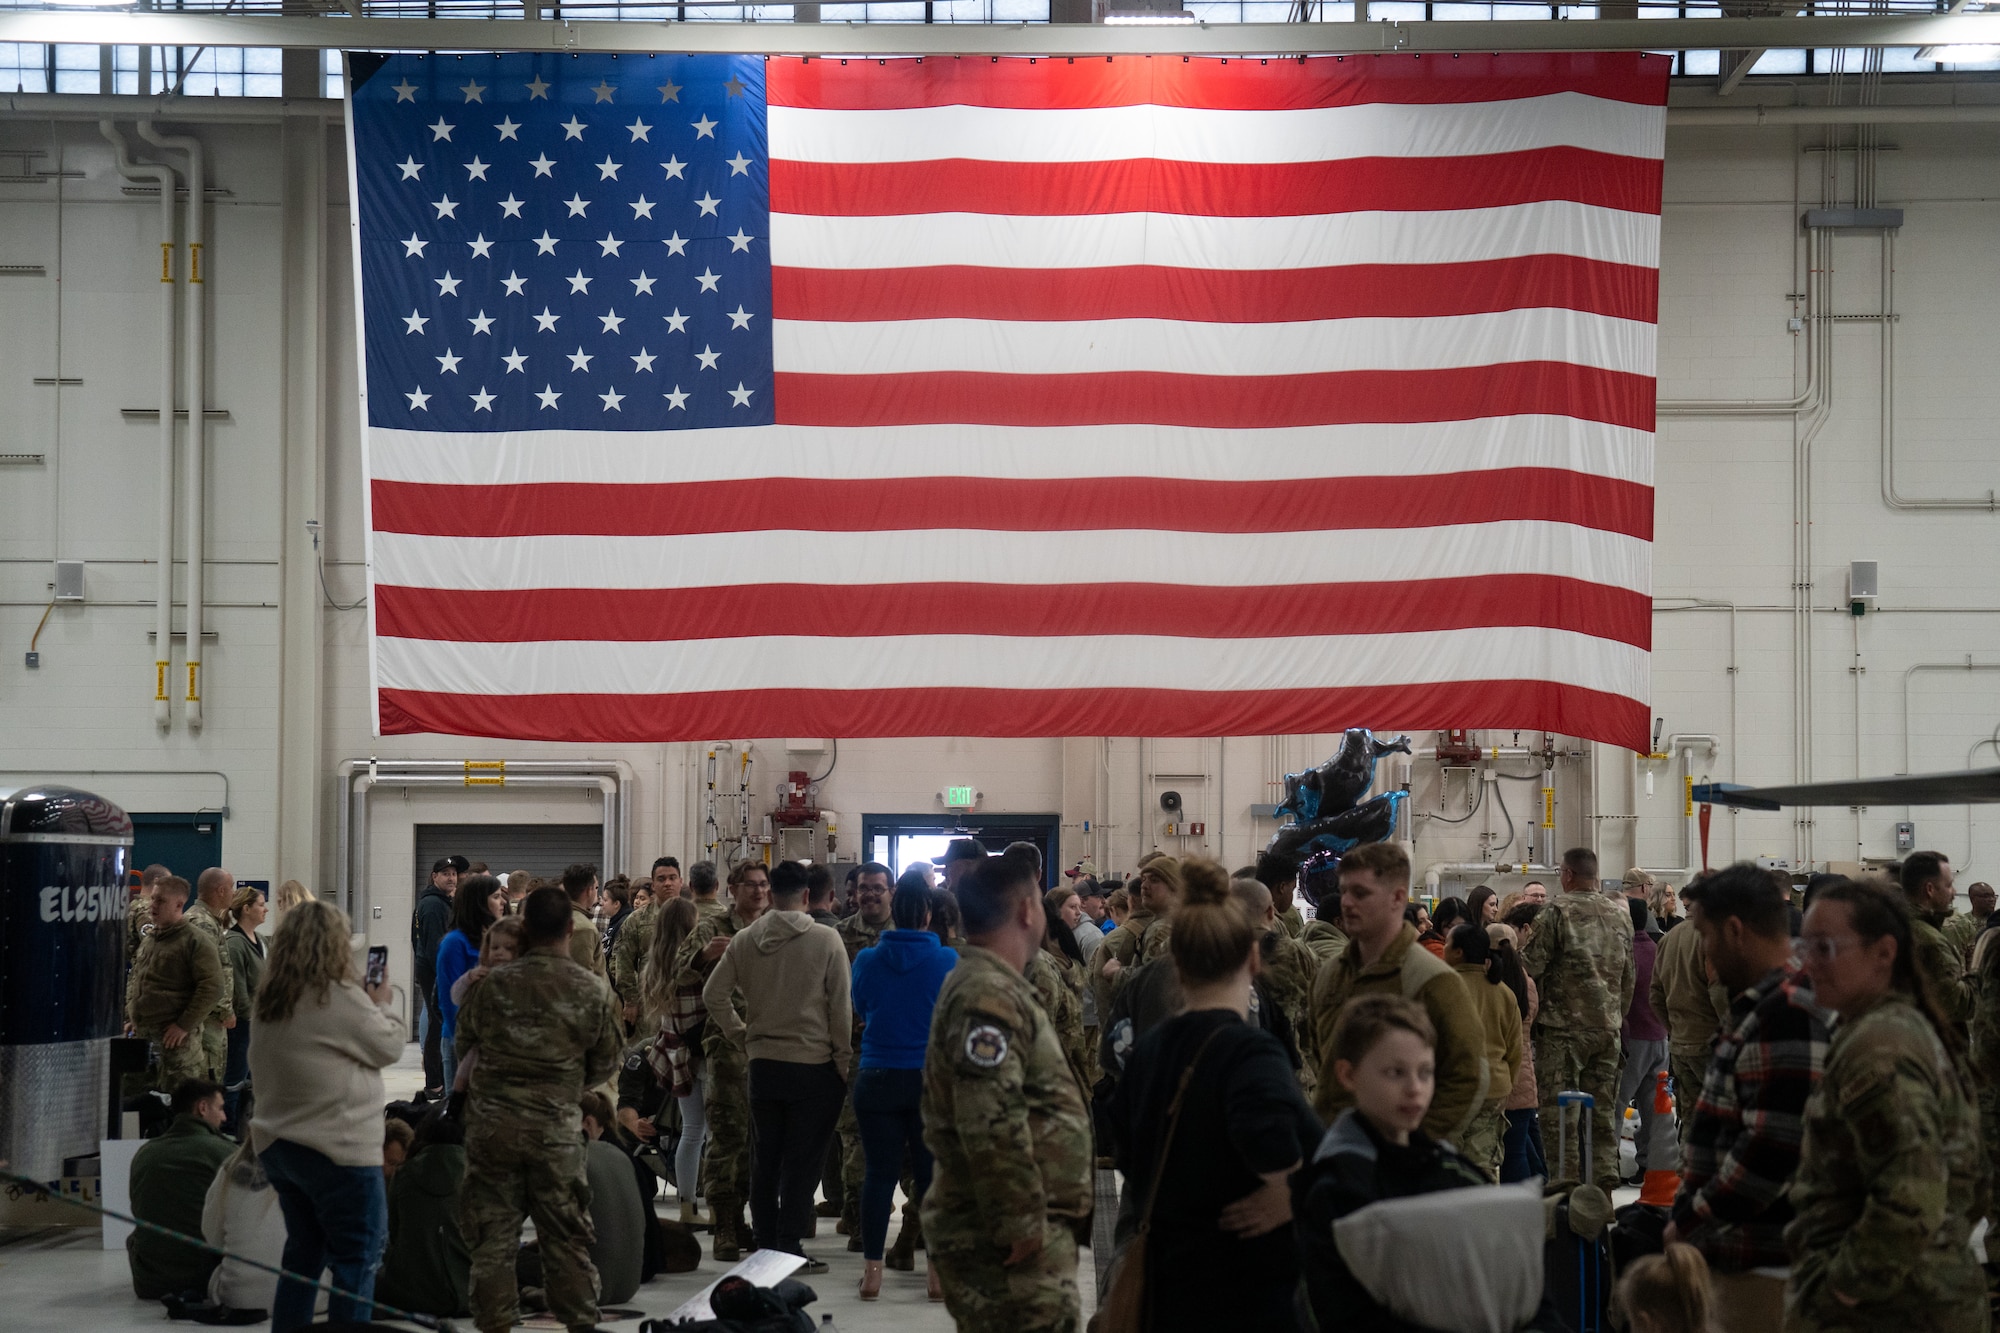 The American flag hangs inside a hanger above a crowd of Airmen, friends, and family members